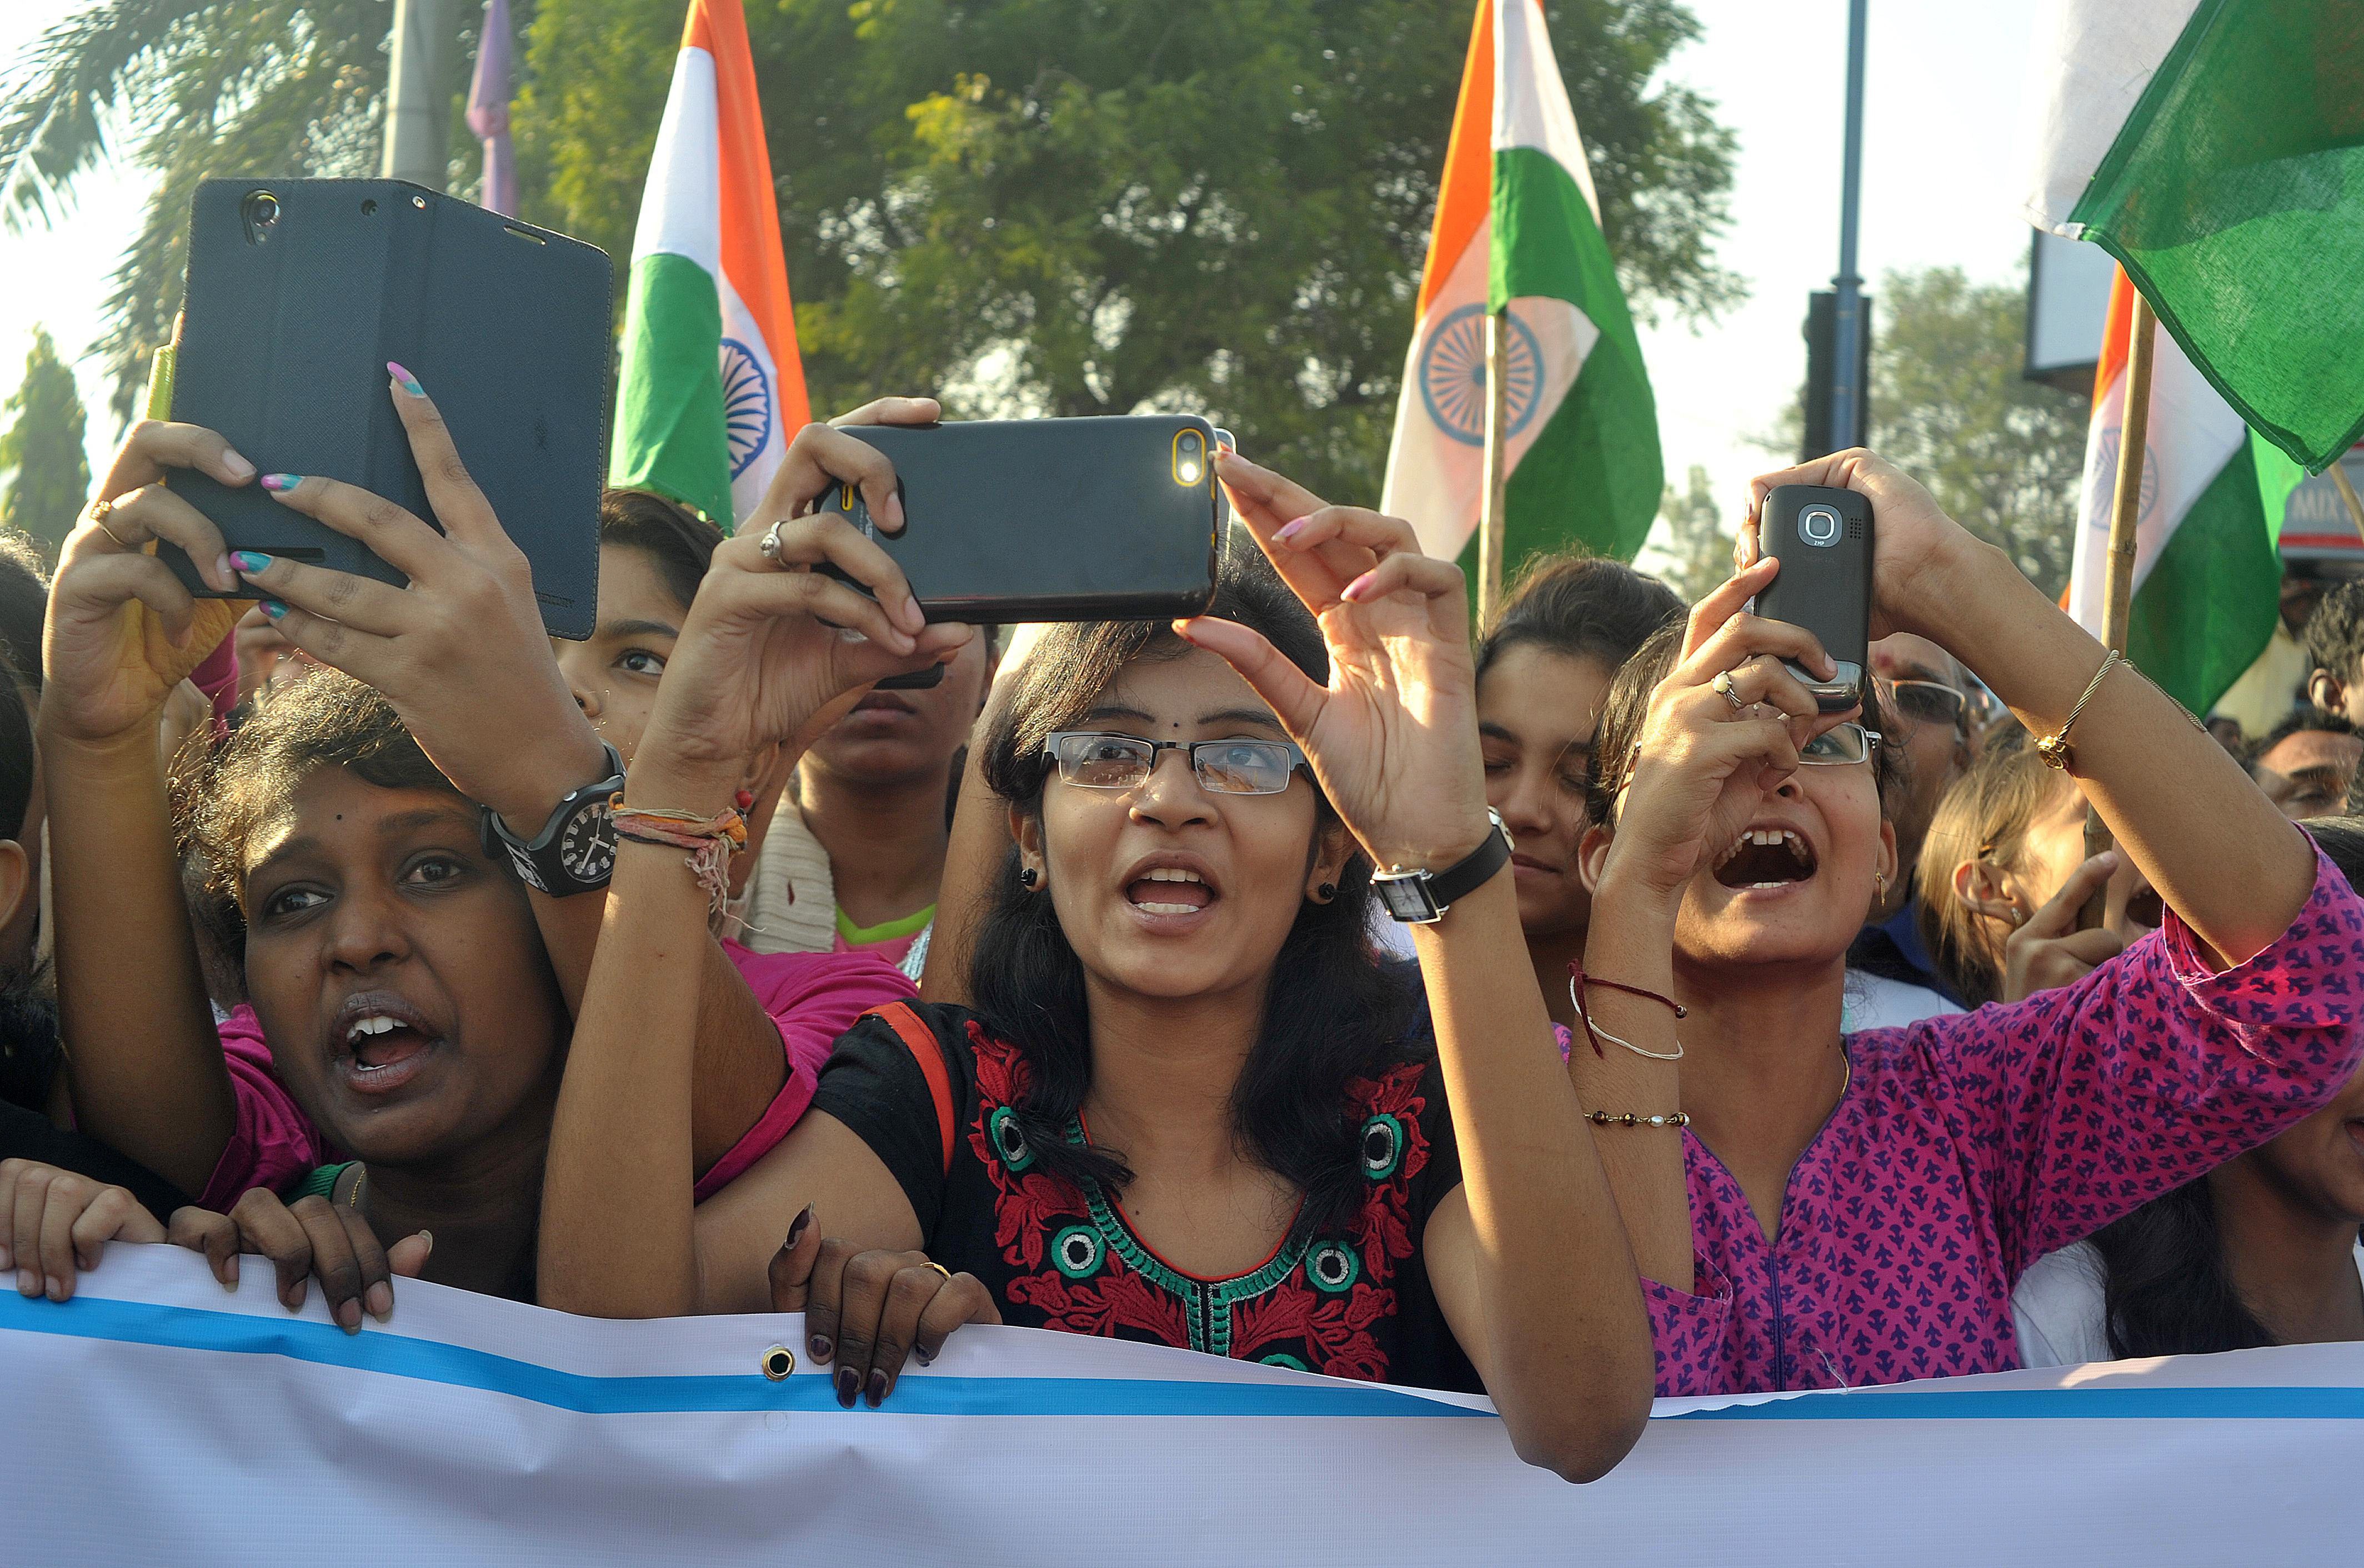 Indian students use cellphones to photograph unseen Central Home Minister of India Rajnath Singh during a Run for Unity event to mark the anniversary of the birth of Sardar Vallabhbhai Patel in Hyderabad on October 31, 2014. (Noah Seelam&mdash;AFP/Getty Images)